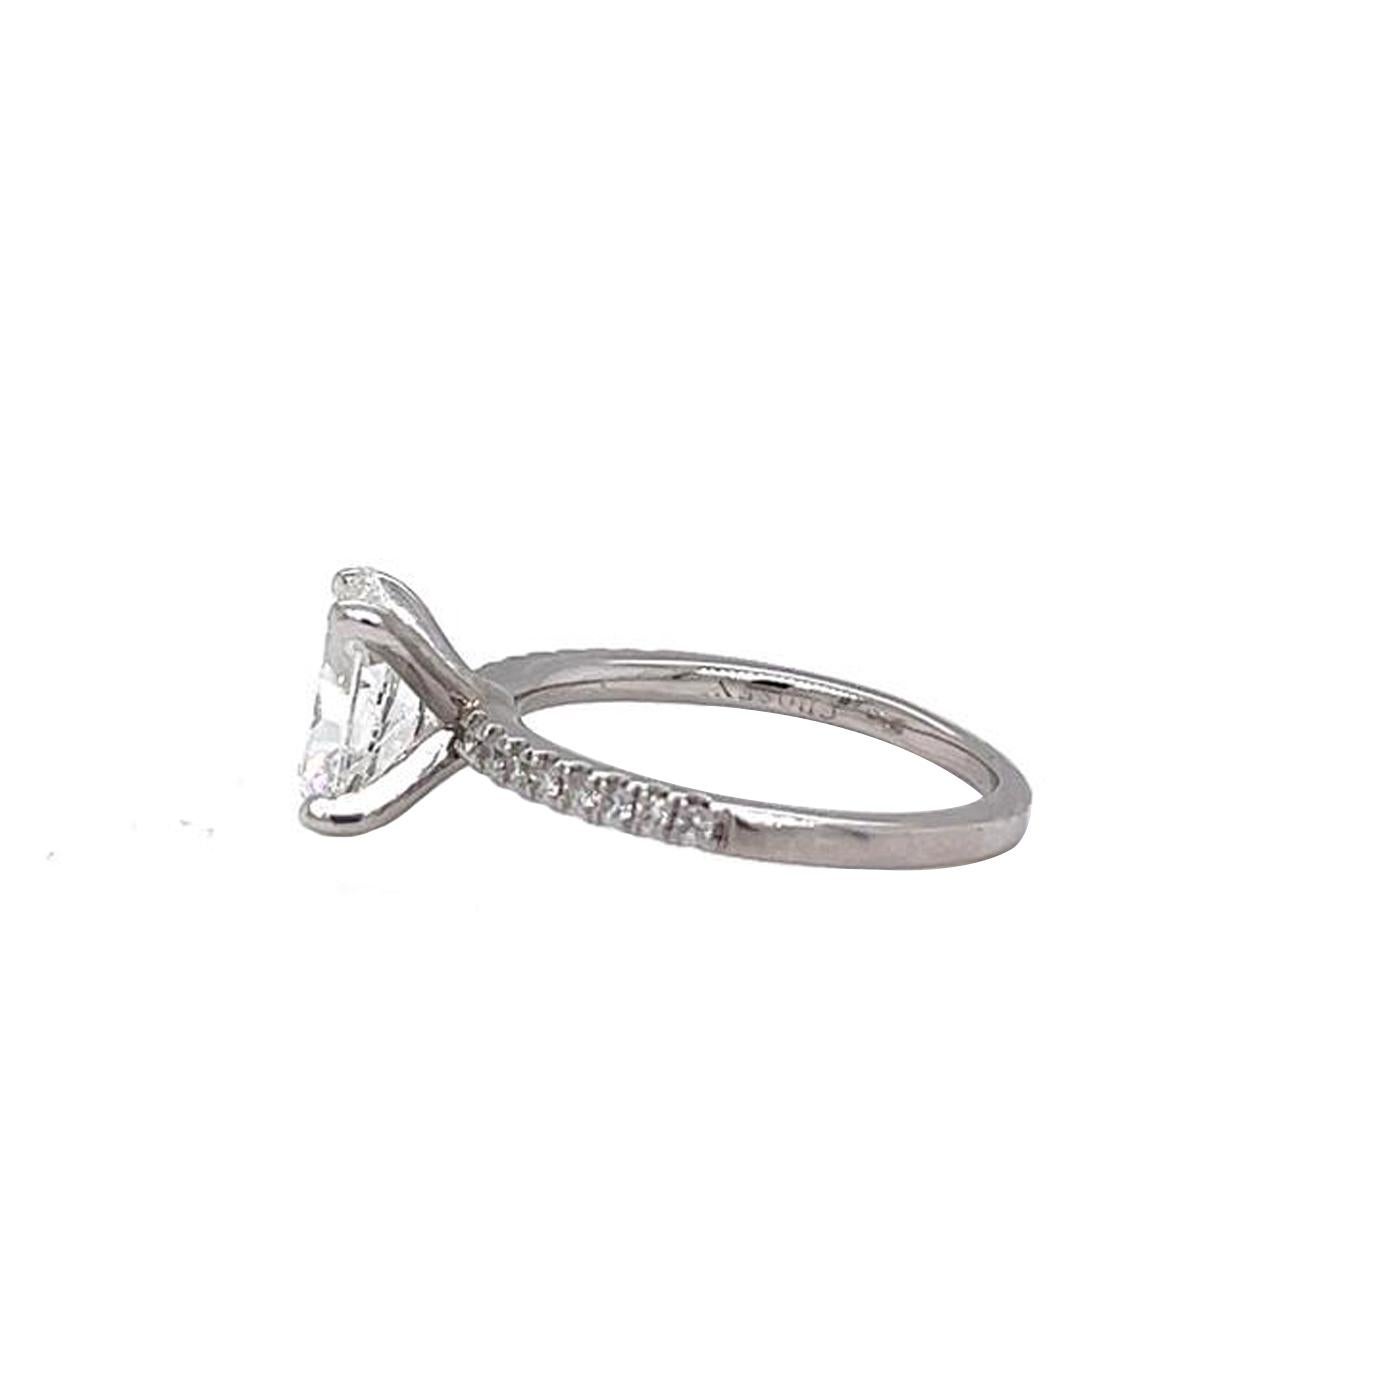 This Oval Diamond ring is accompanied by a GIA Certified report certifying that the 1.70 Carat Cushion Cut Si2 clarity I color Diamond Ring is made in Platinum with 0.55ctw Pave Natural Diamonds. This beautiful diamond ring is ideal for your special